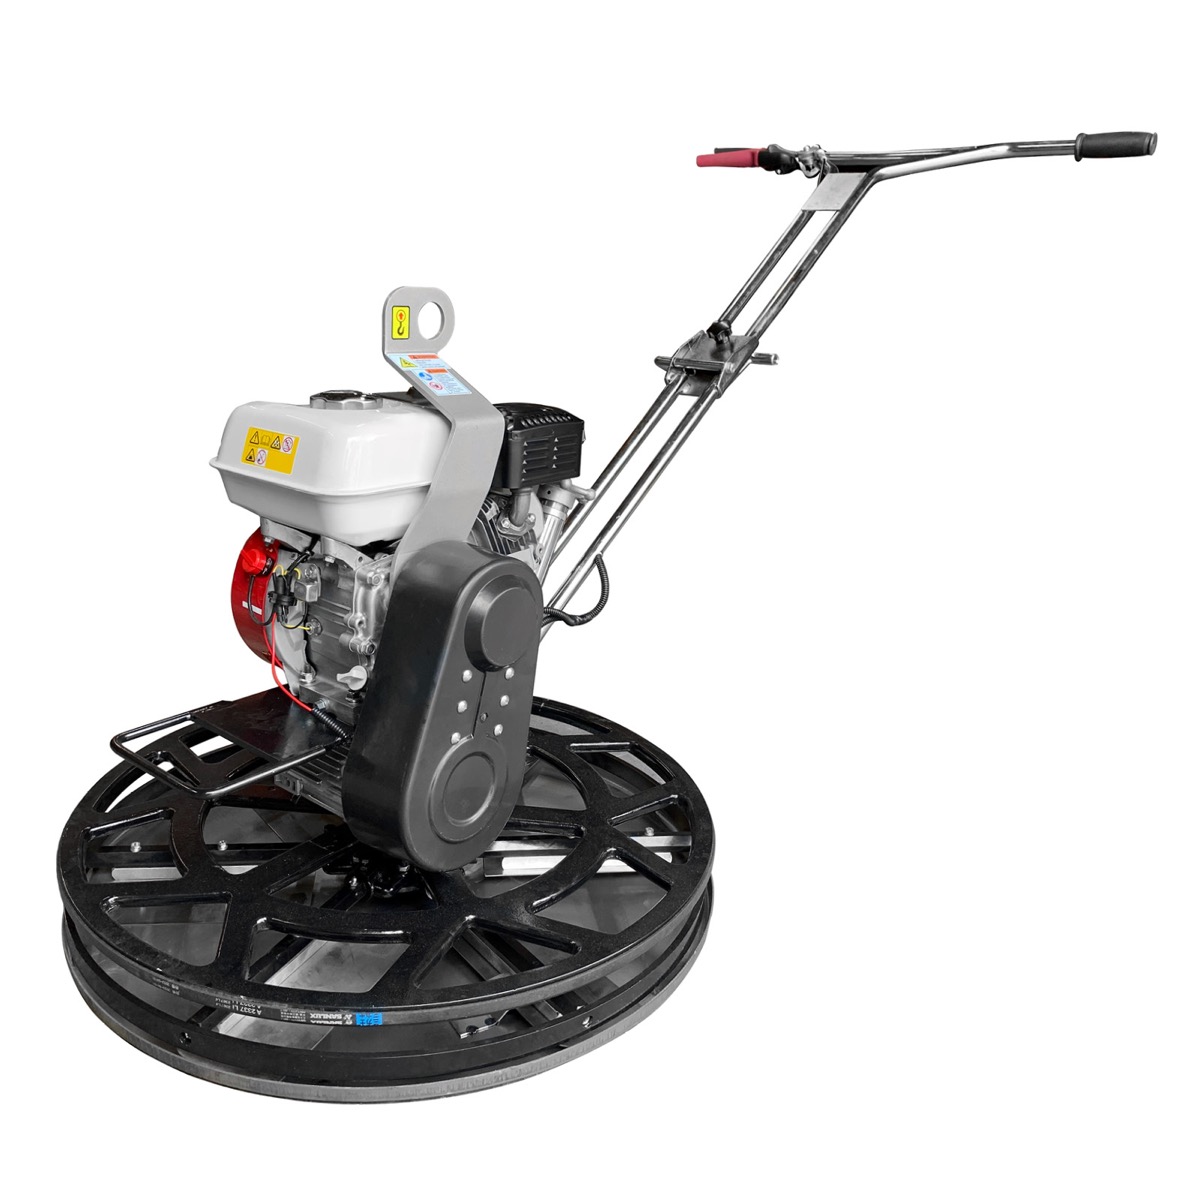 Pedestrian walk-behind trowels for concrete finishing. This petrol powered Honda GX160 comes with a removable pan and has 6 blades. Available in the United Kingdom Via Speedcrete.